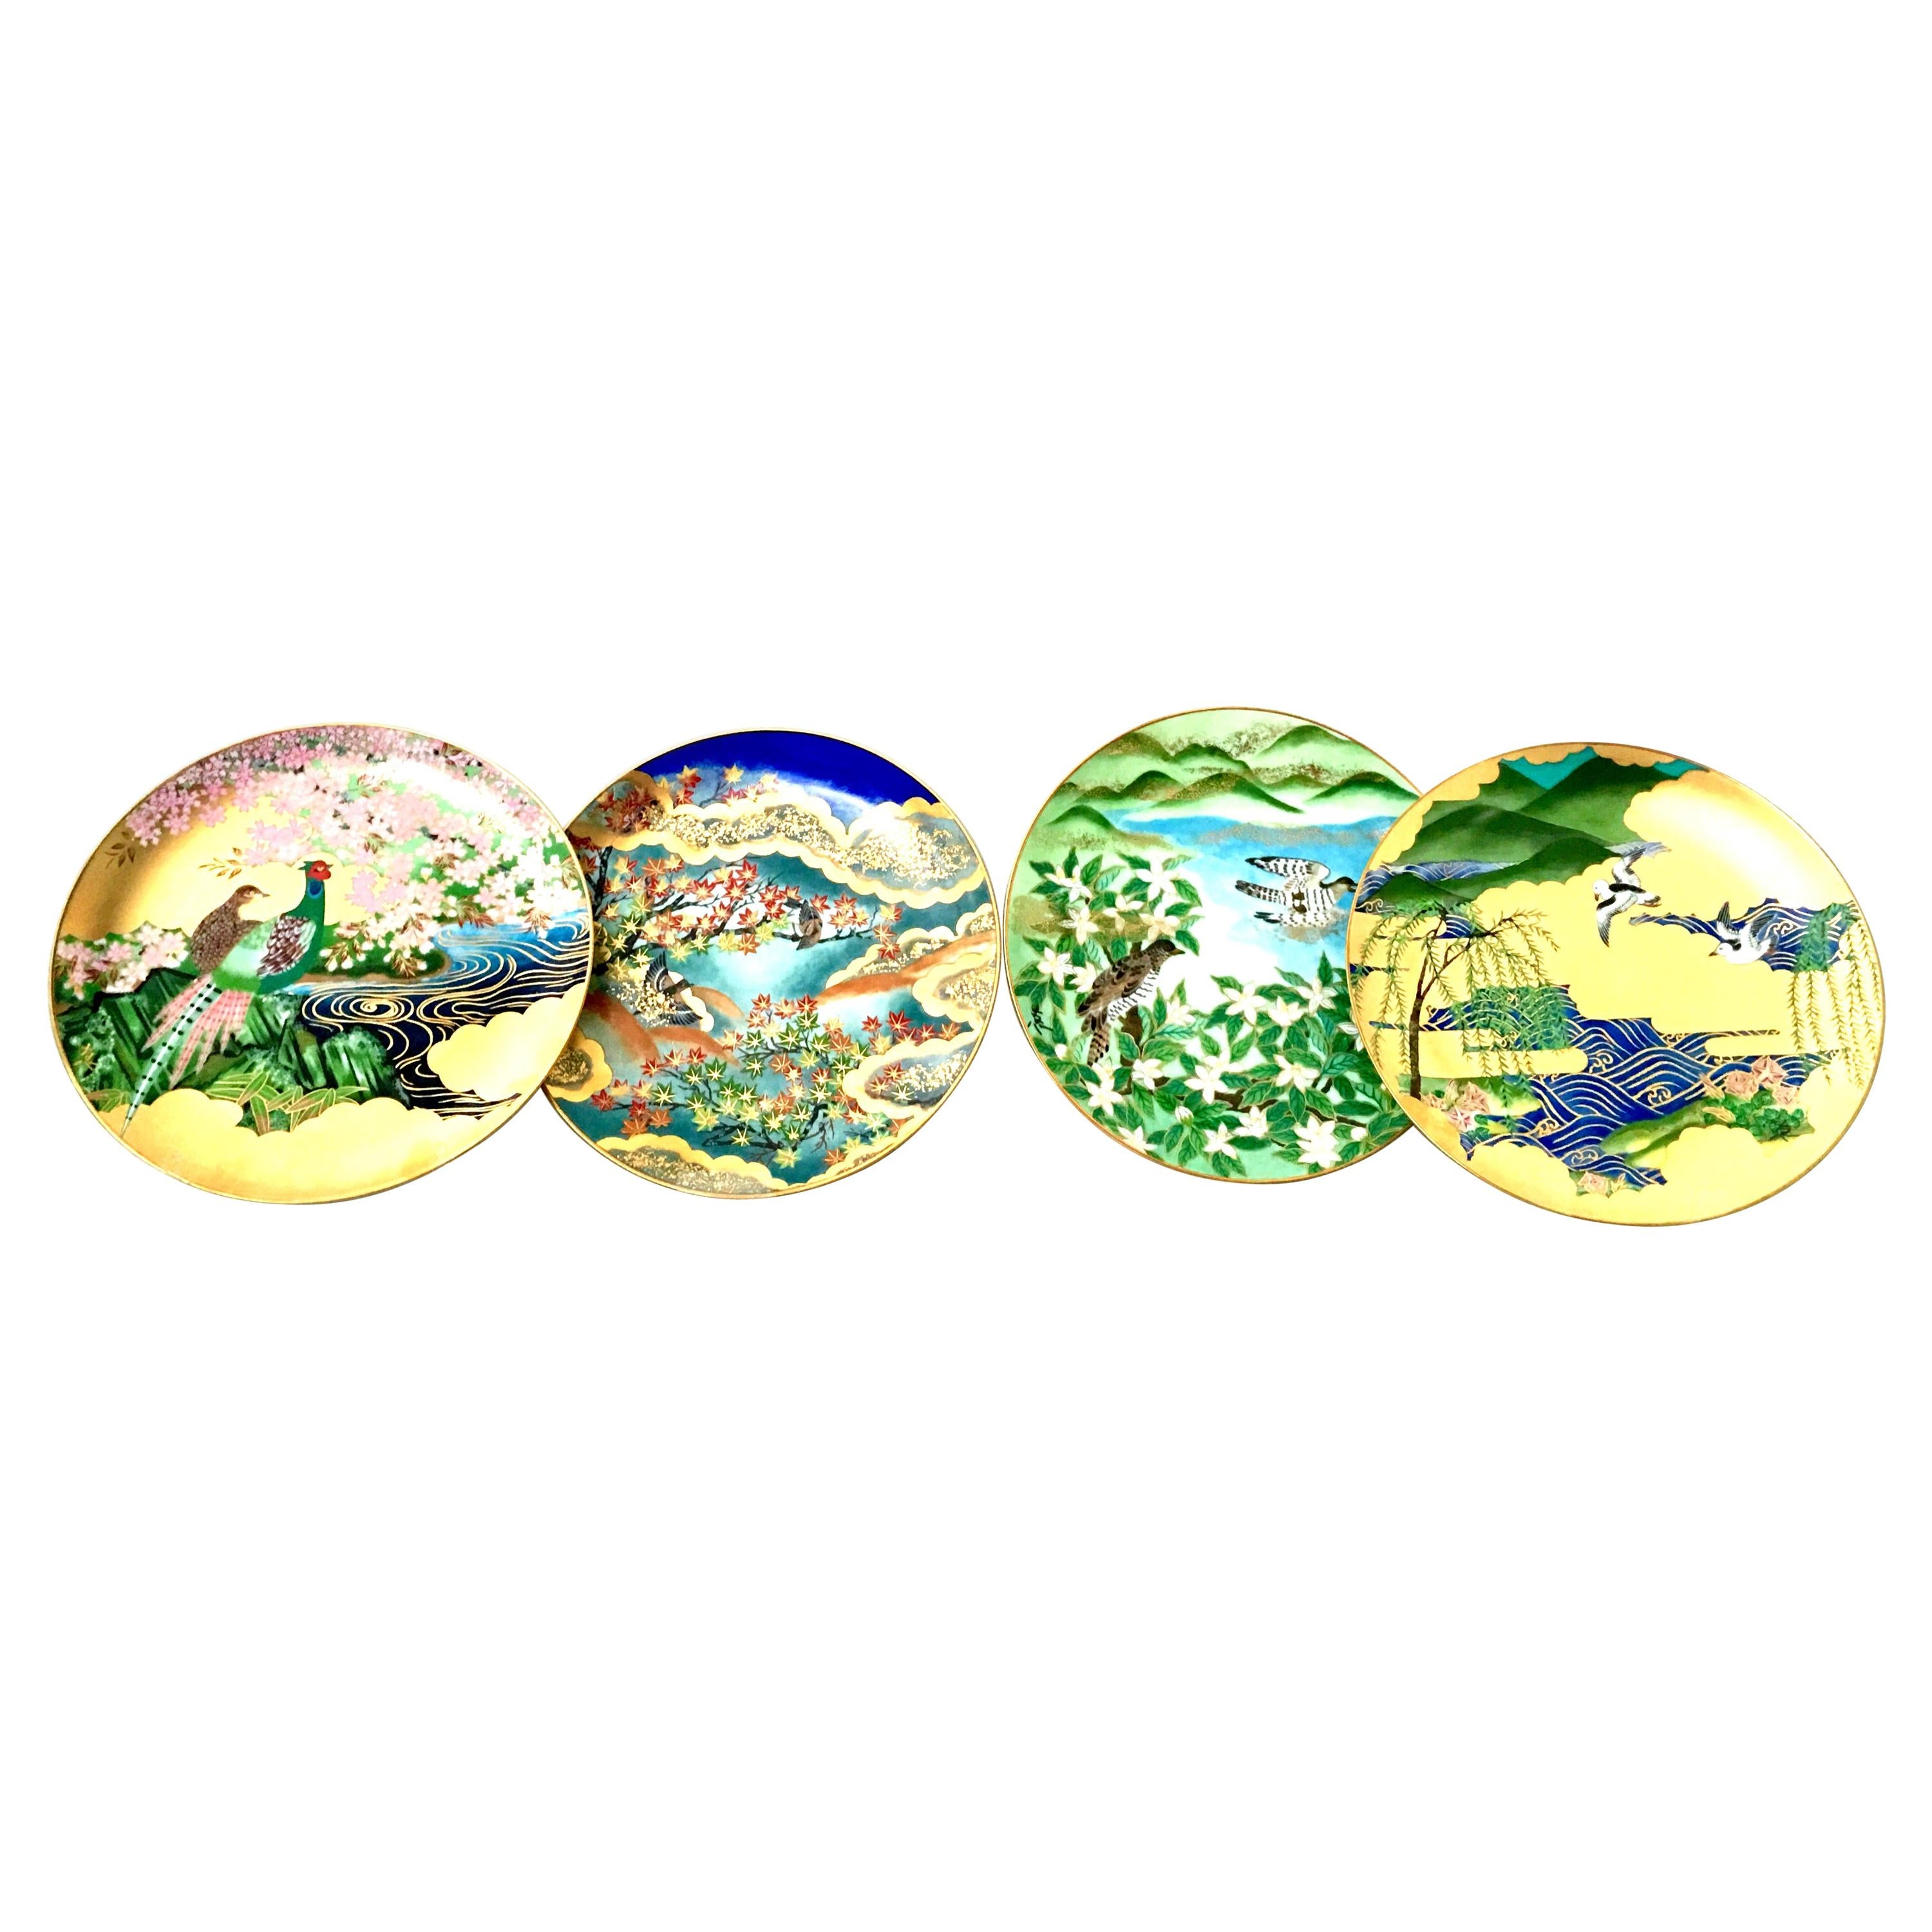 1986 Japanese Limited Edition Hand-Painted Porcelain Plates Set of 4 For Sale